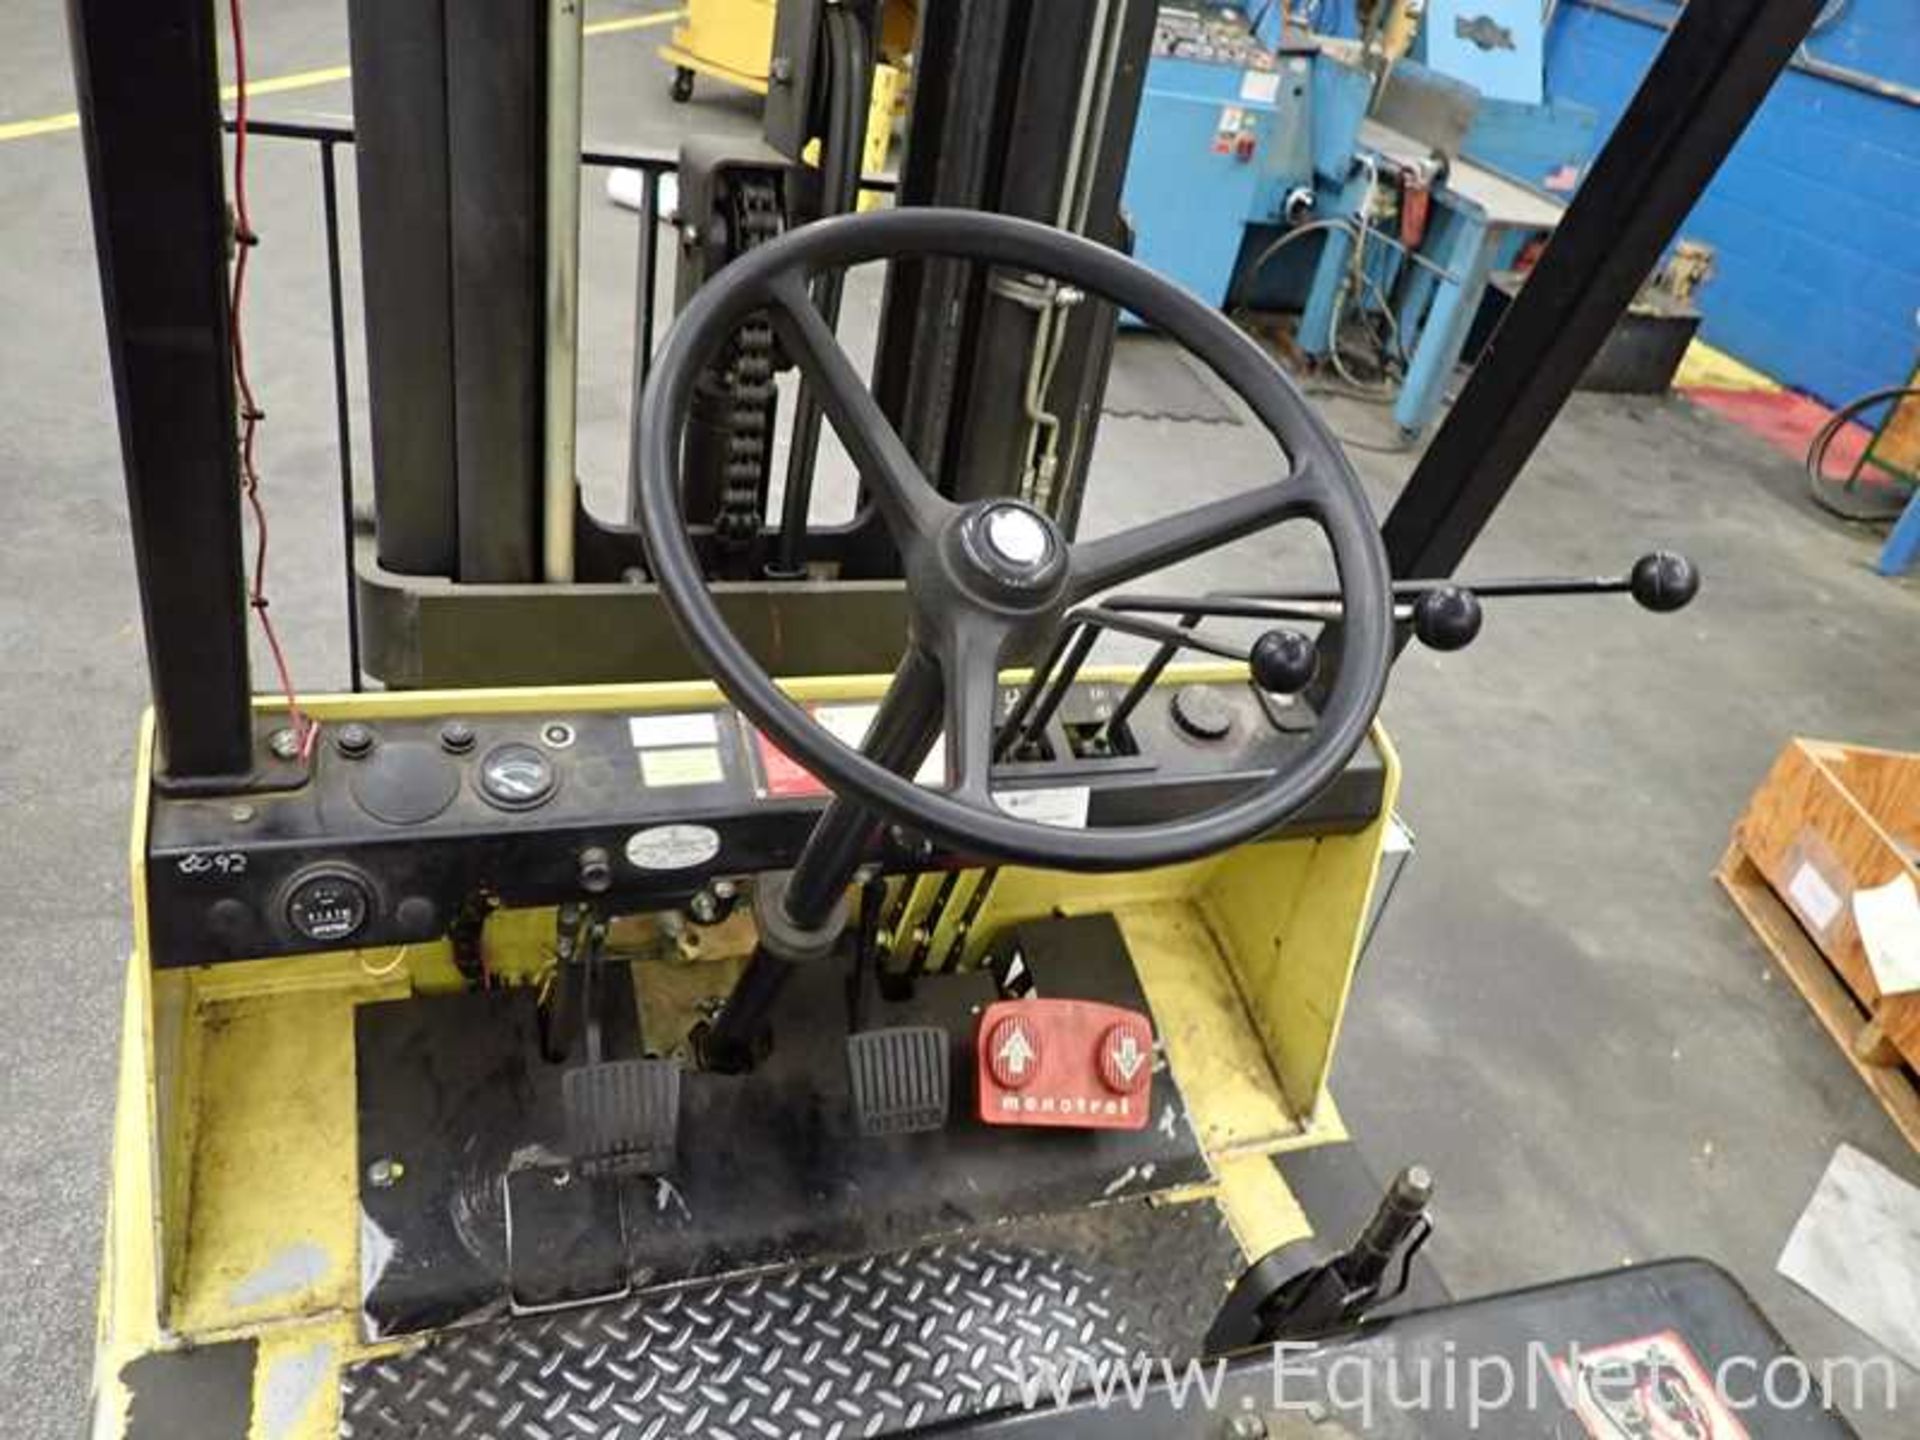 Hyster S40XL Fork Truck - Image 5 of 6